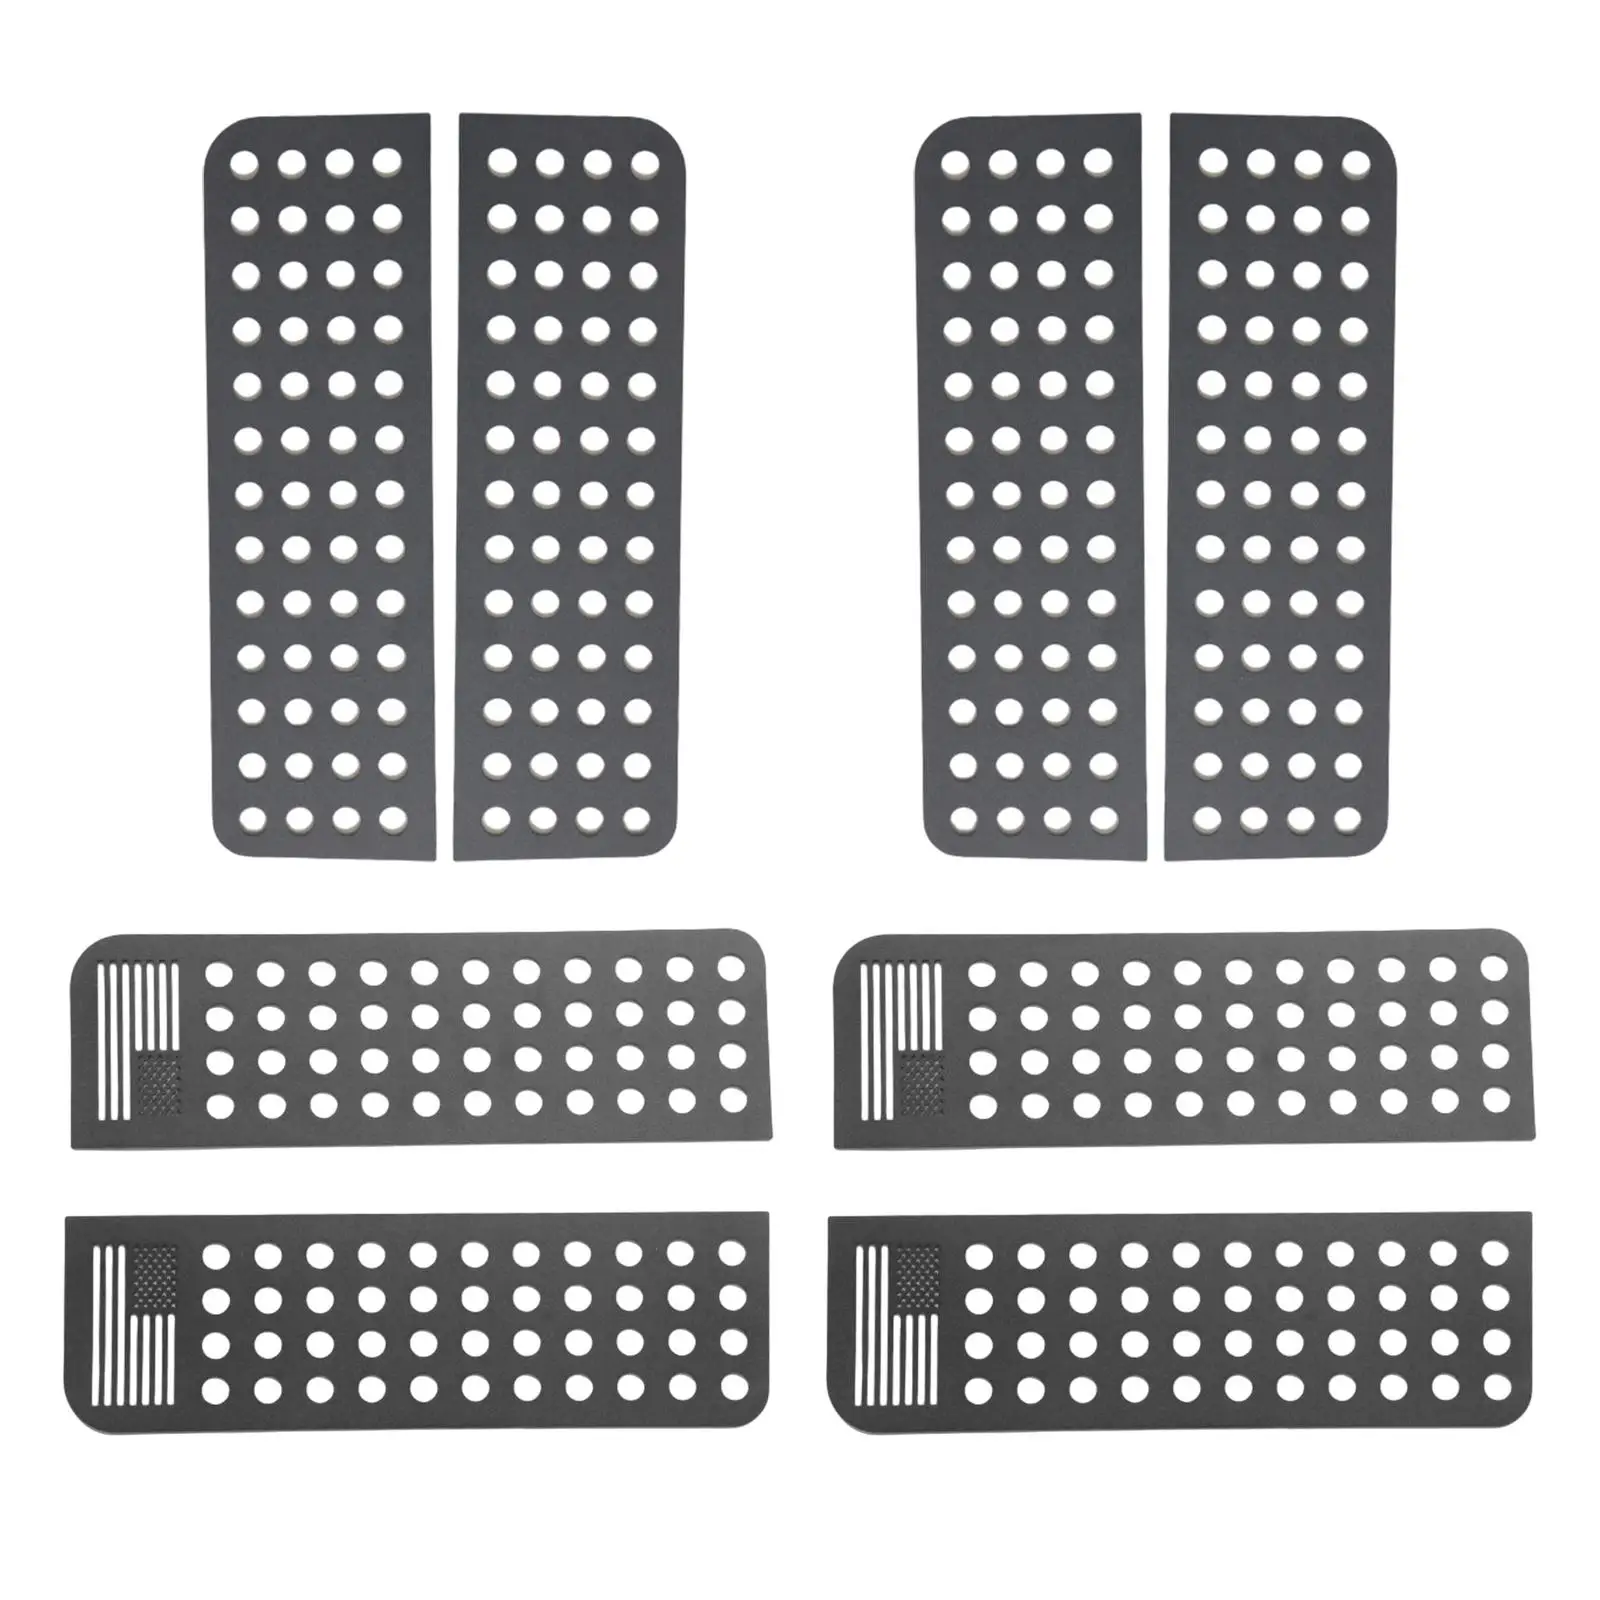 2x Rear Window Glass Cover Decoration Reliable Aluminum Alloy Decorative Stickers Exterior Accessories for